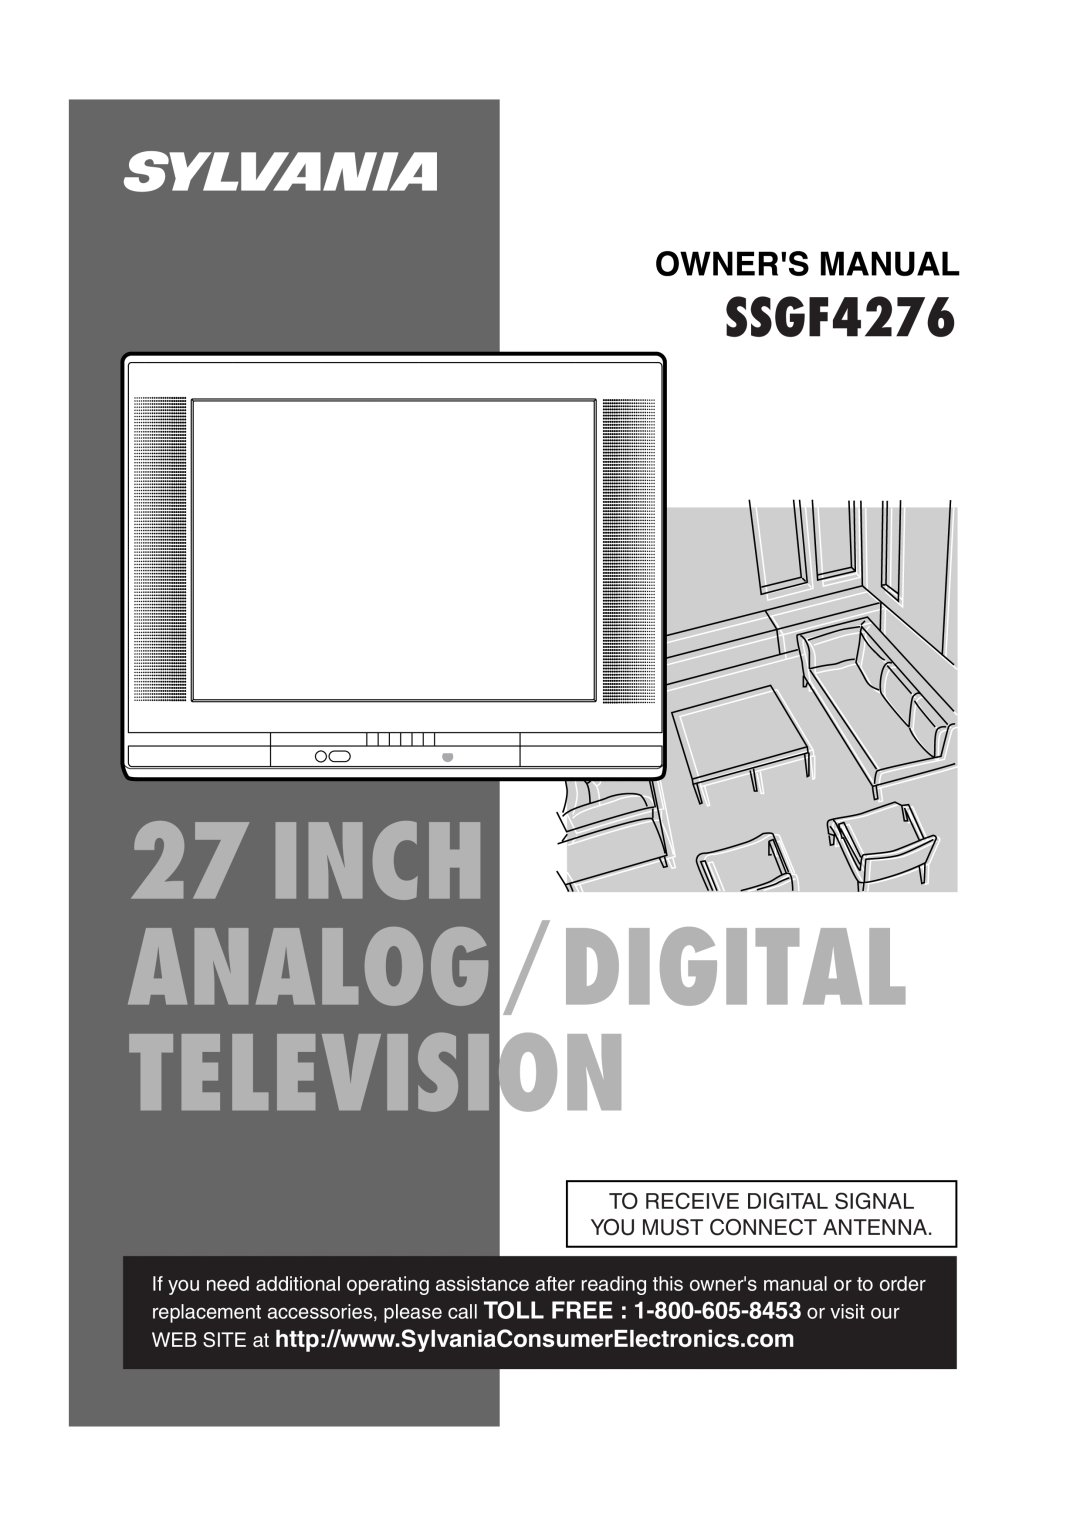 Sylvania SSGF4276 owner manual To Receive Digital Signal You Must Connect Antenna 